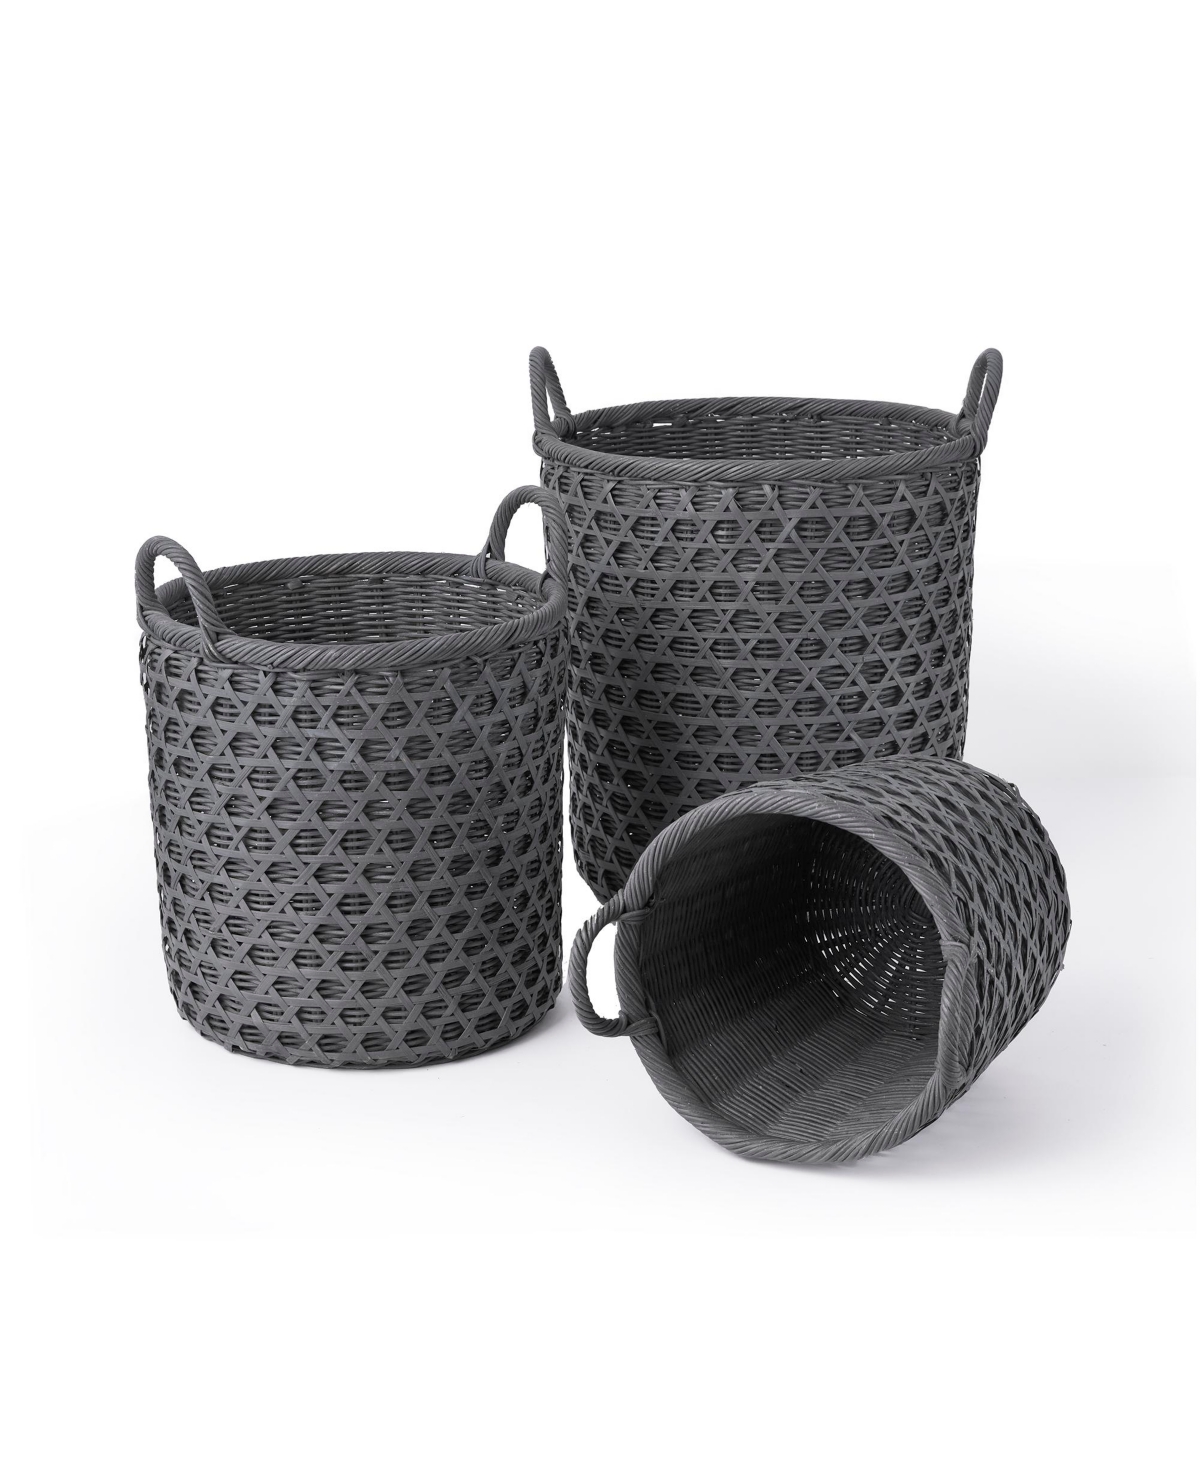 3 Piece Round Rattan and Bamboo Caning Basket Set with Ear Handles - Gray